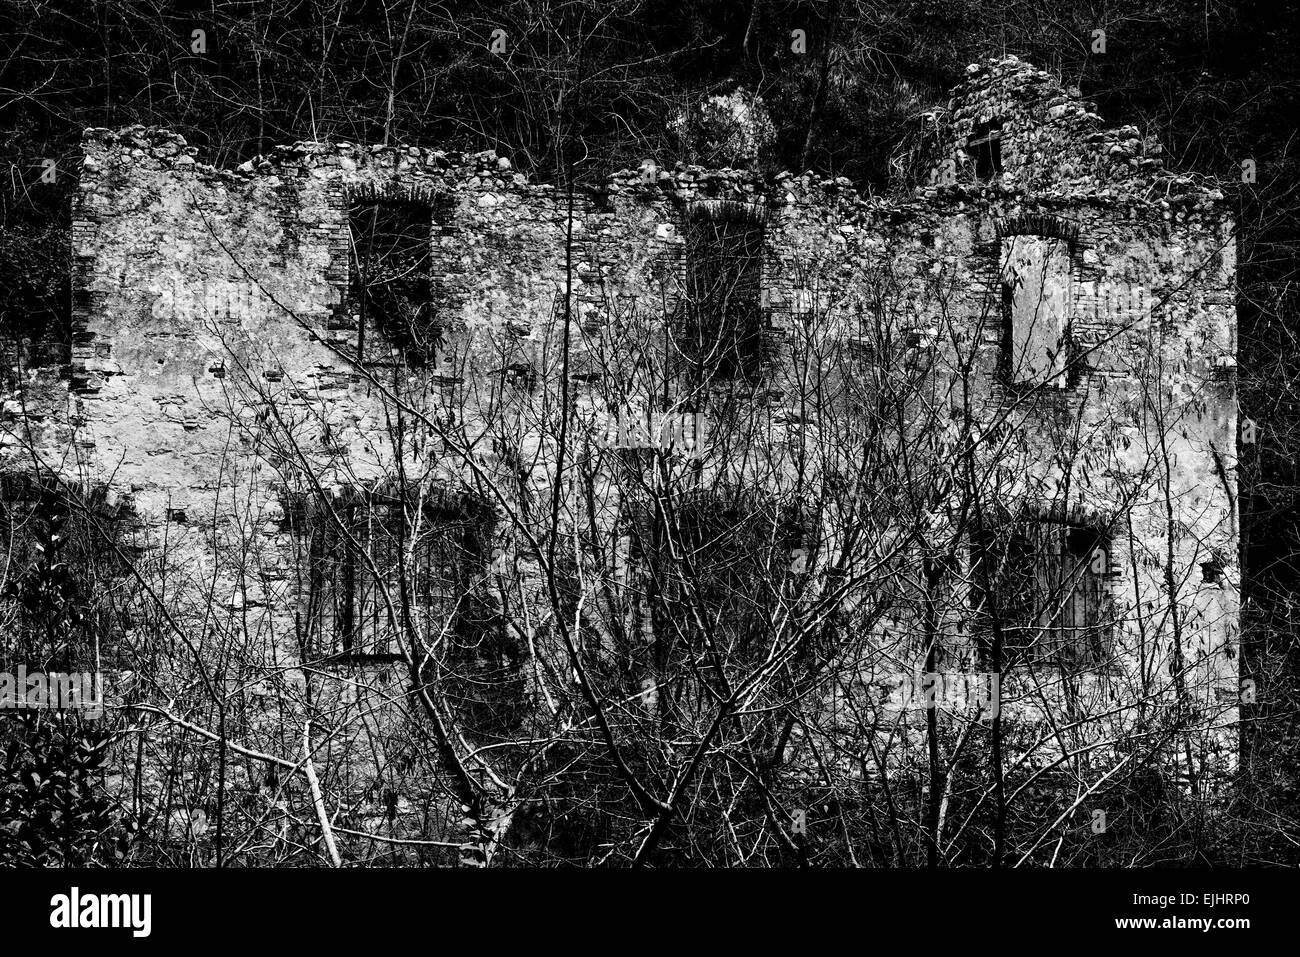 Remains of a paper factory in Toscolano Maderno, Italy. Stock Photo